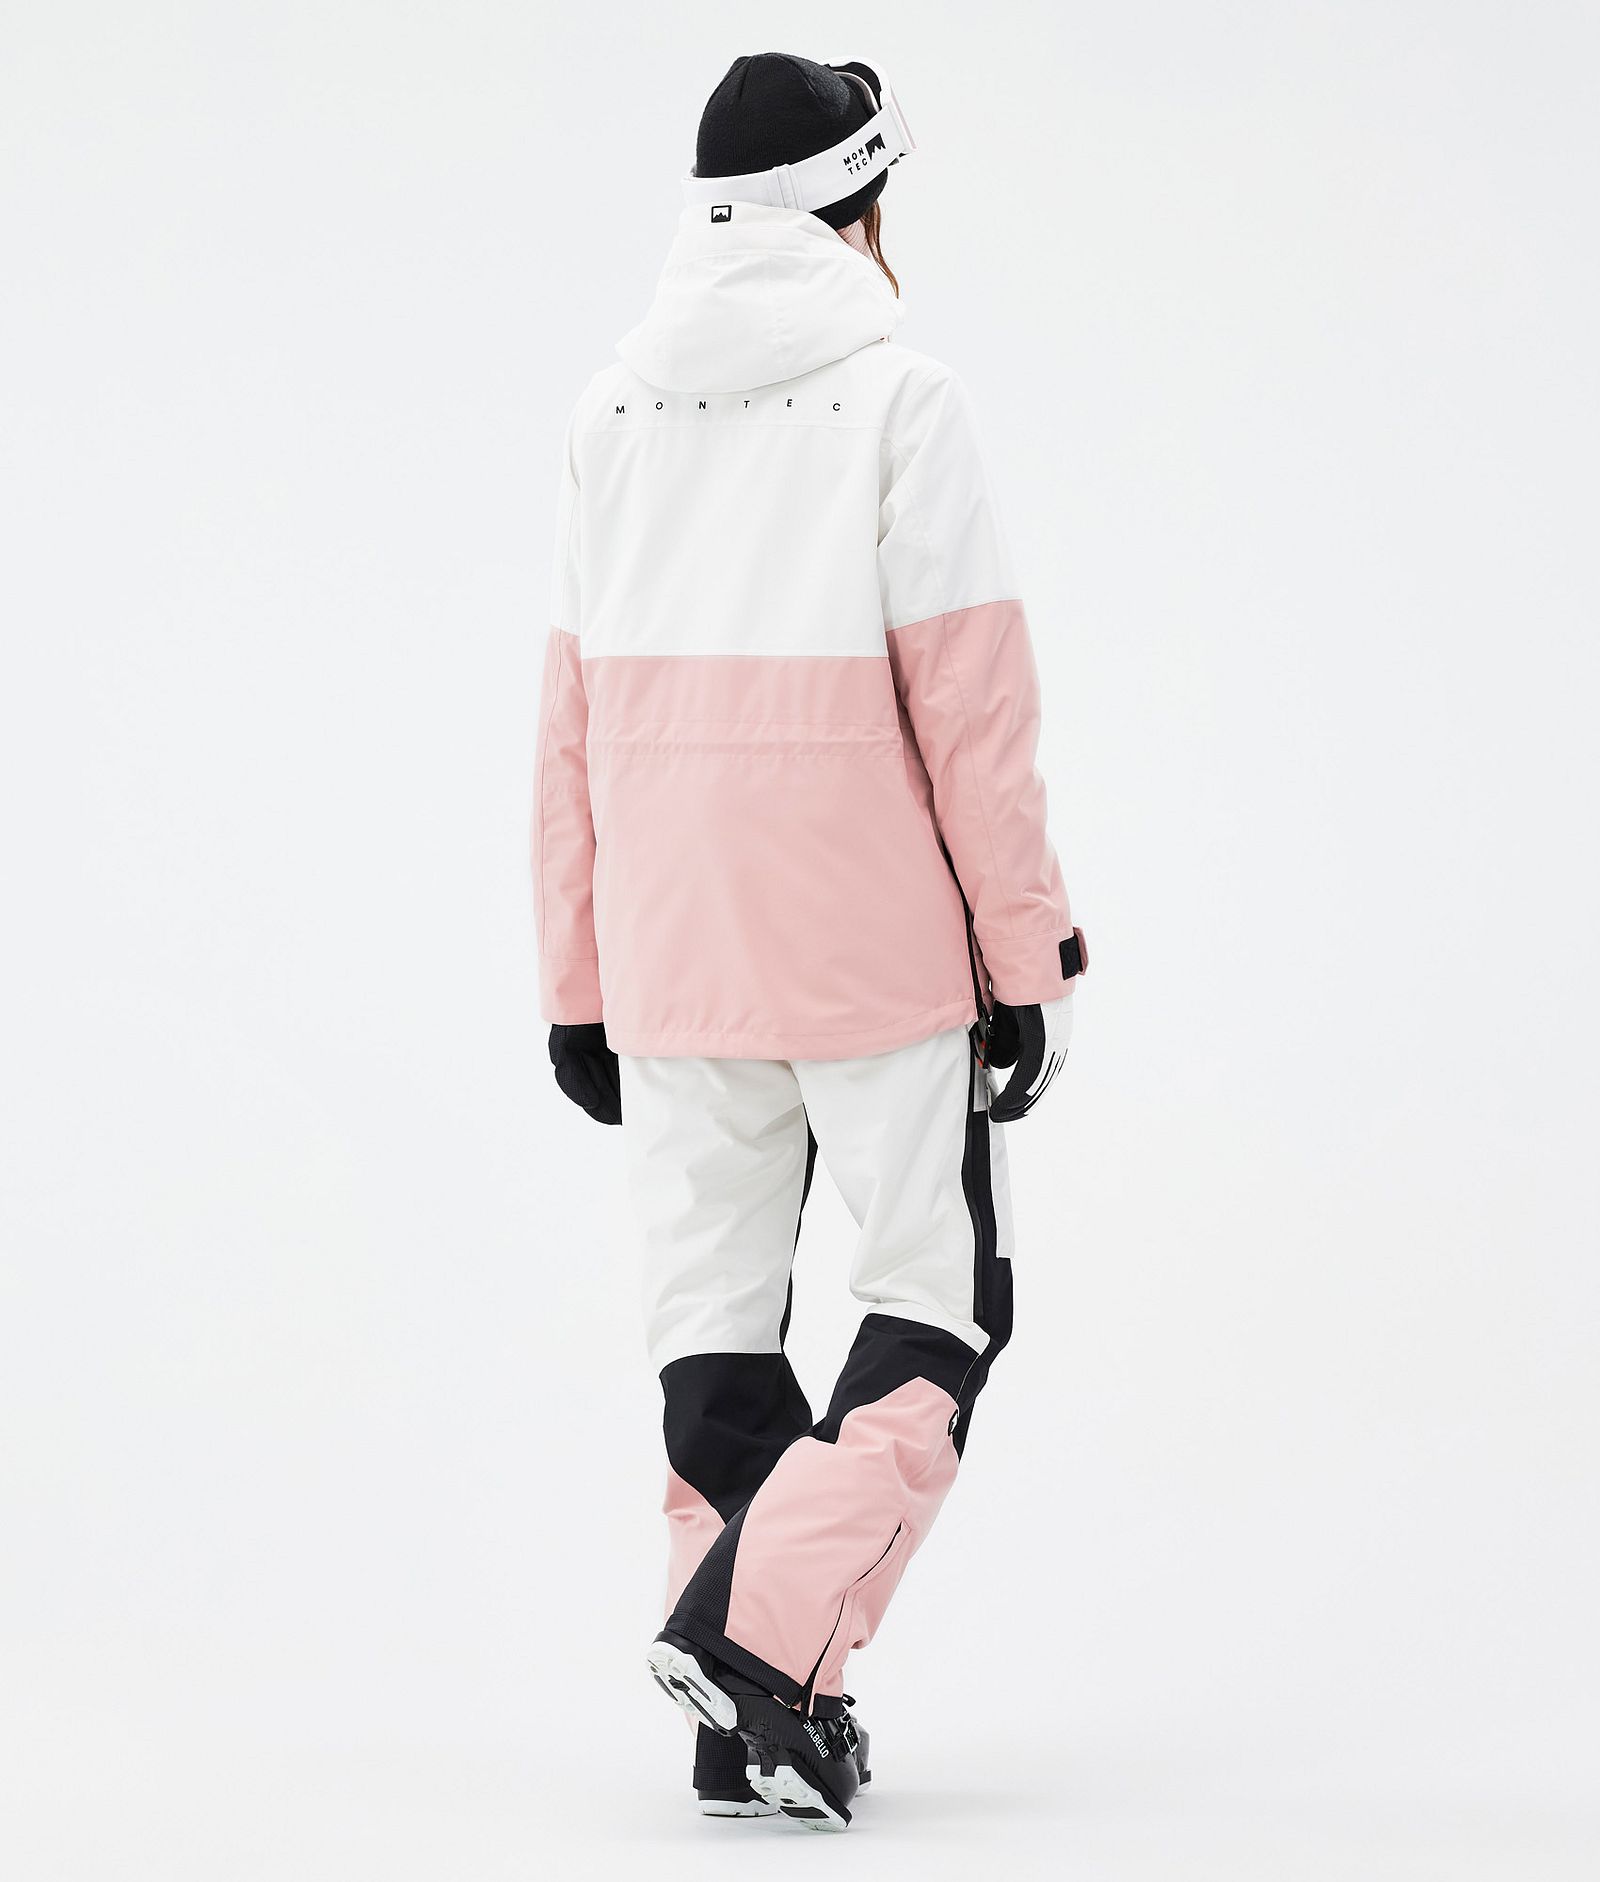 Dune W Laskettelu Outfit Naiset Old White/Black/Soft Pink